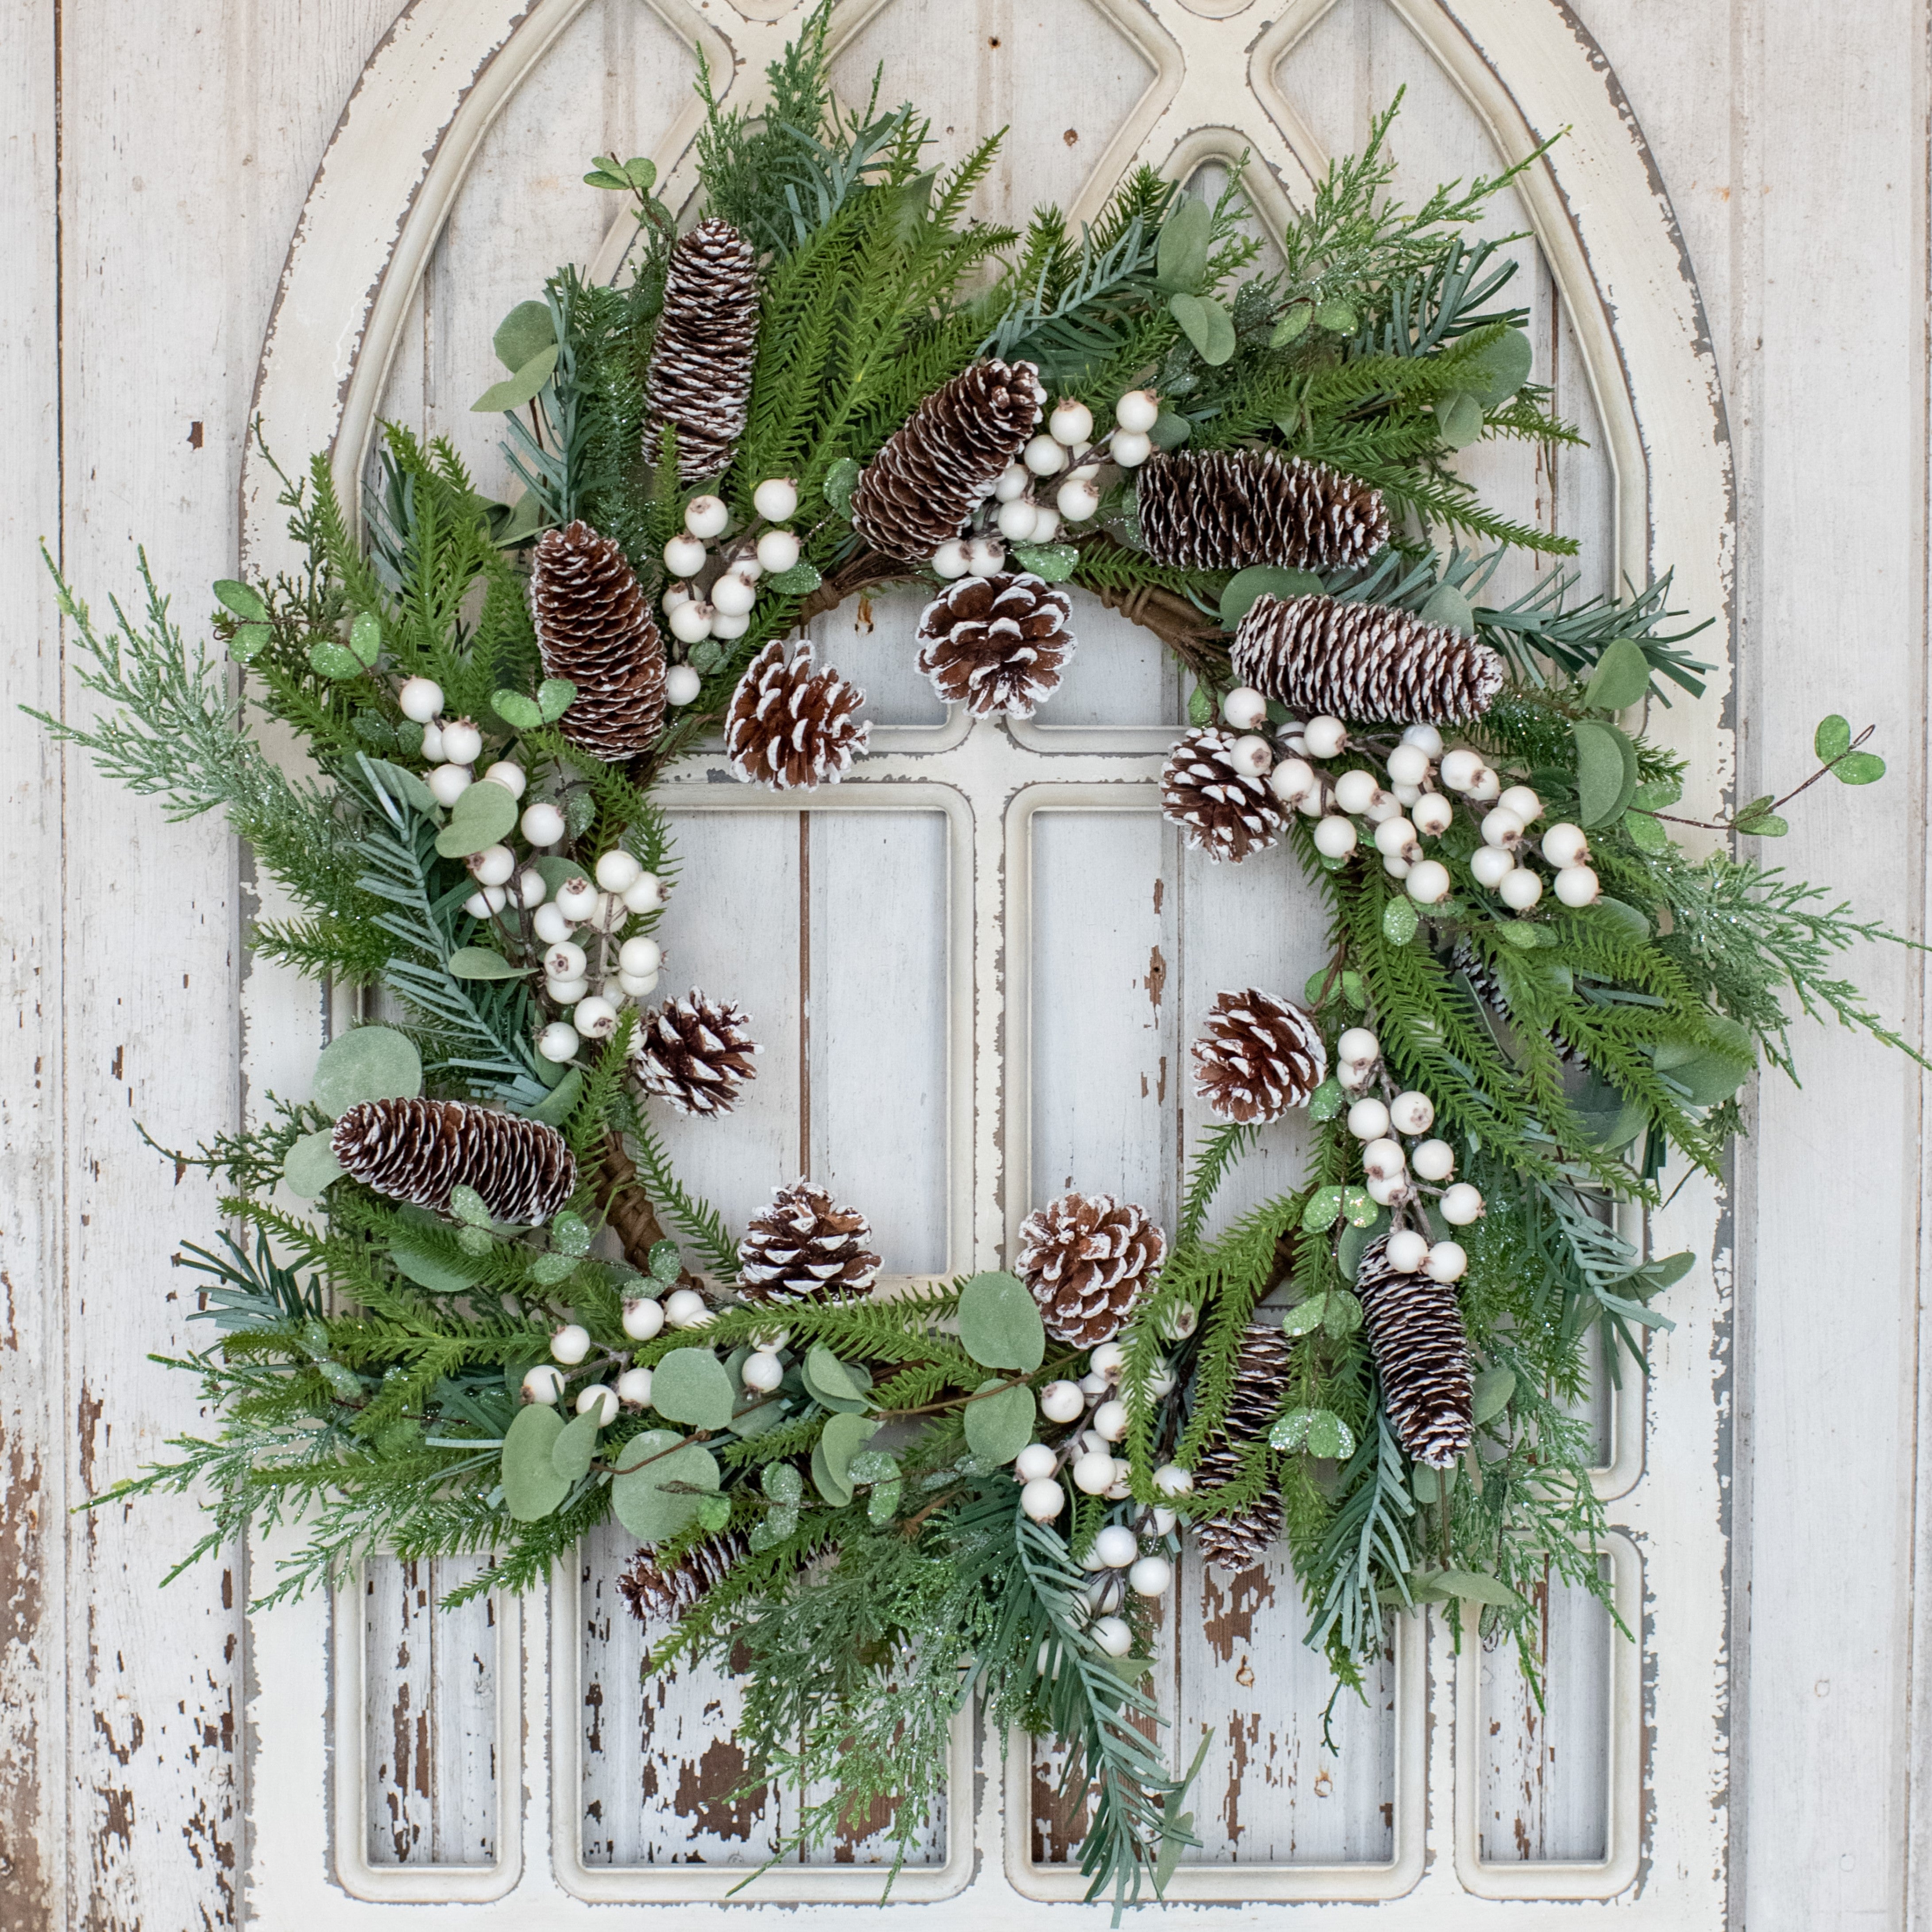 24" Mixed Leaf with Pine Cones Wreath